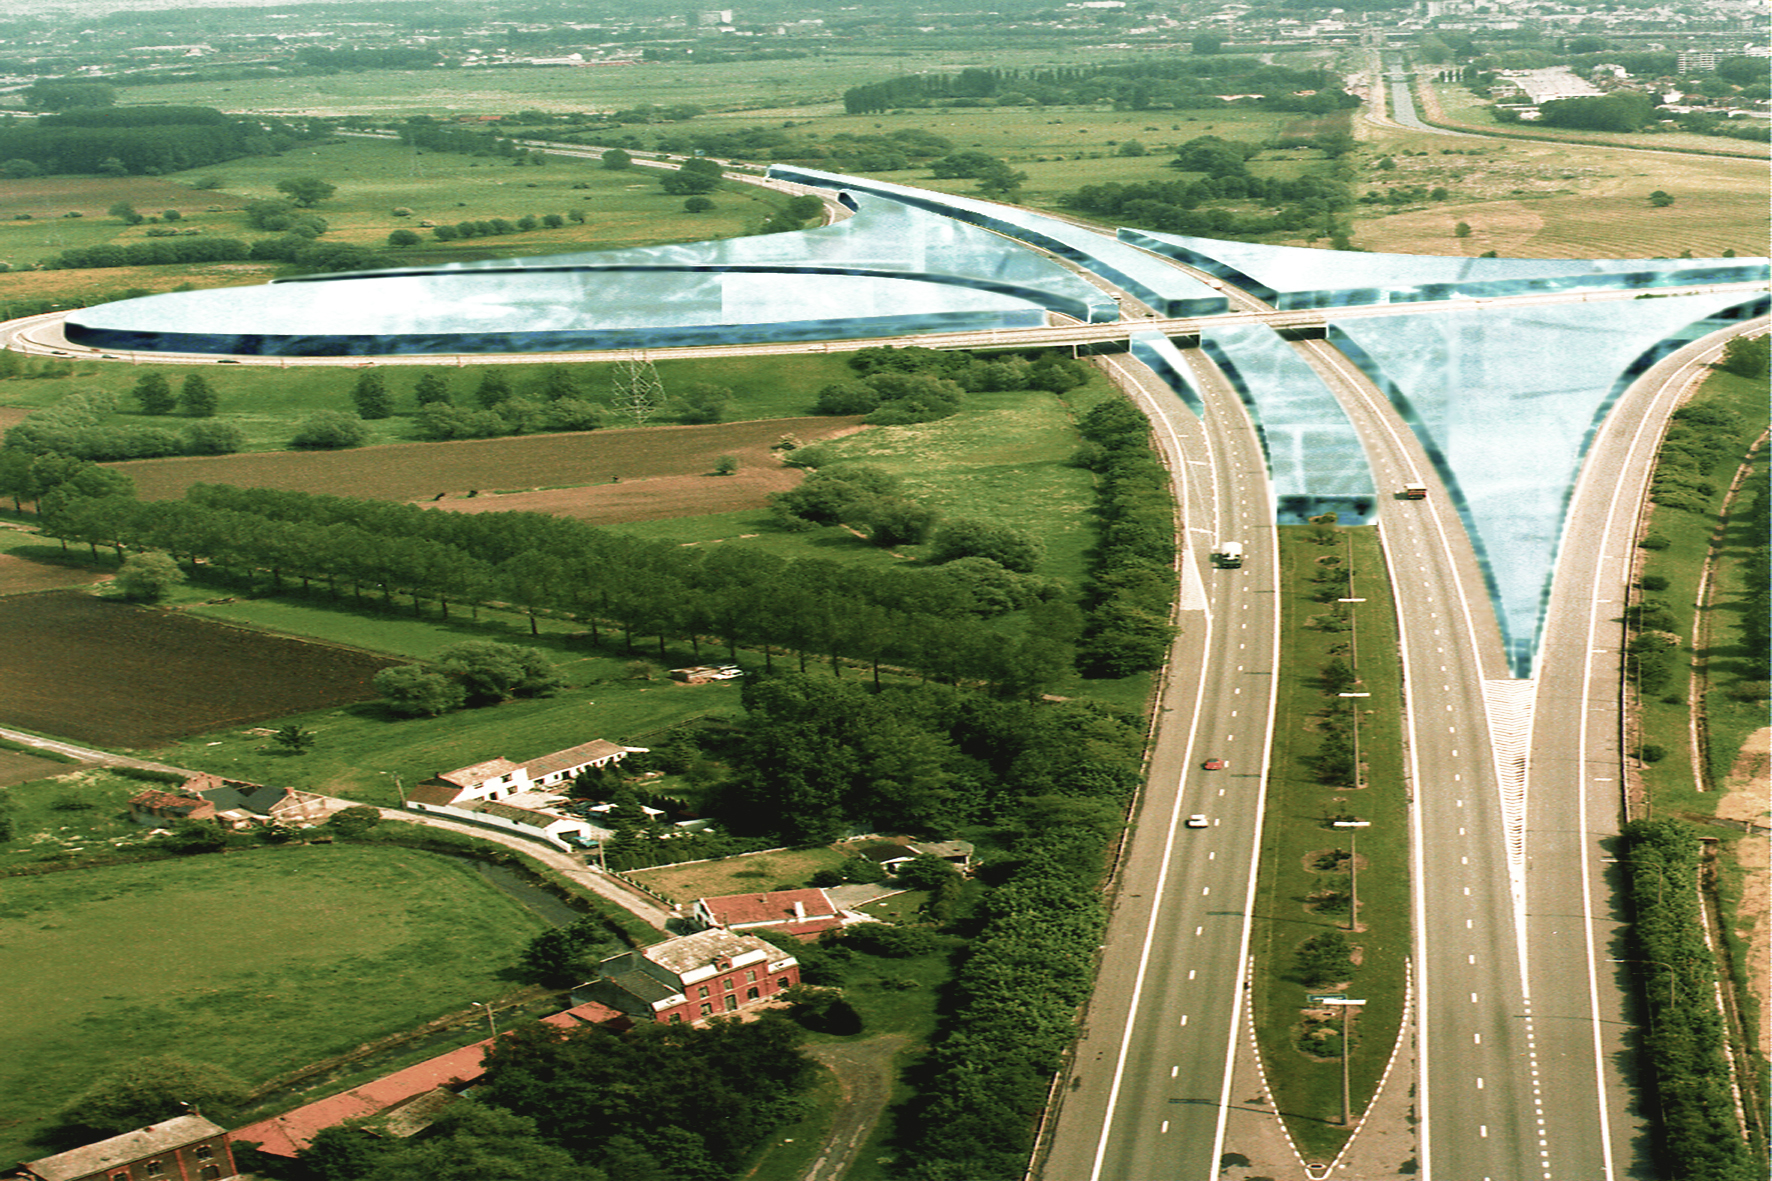 Dirk Coopman, Architect, Intercity highway, economy, underground emission transport, liquid waste, gaseous waste and solid waste, urban planning , autostrade,  automated transport, motorway, autoroute, industrial zones, industrial areas, ecology, motorway junction, motorway intersection, bleu banana logistics becomes green banana